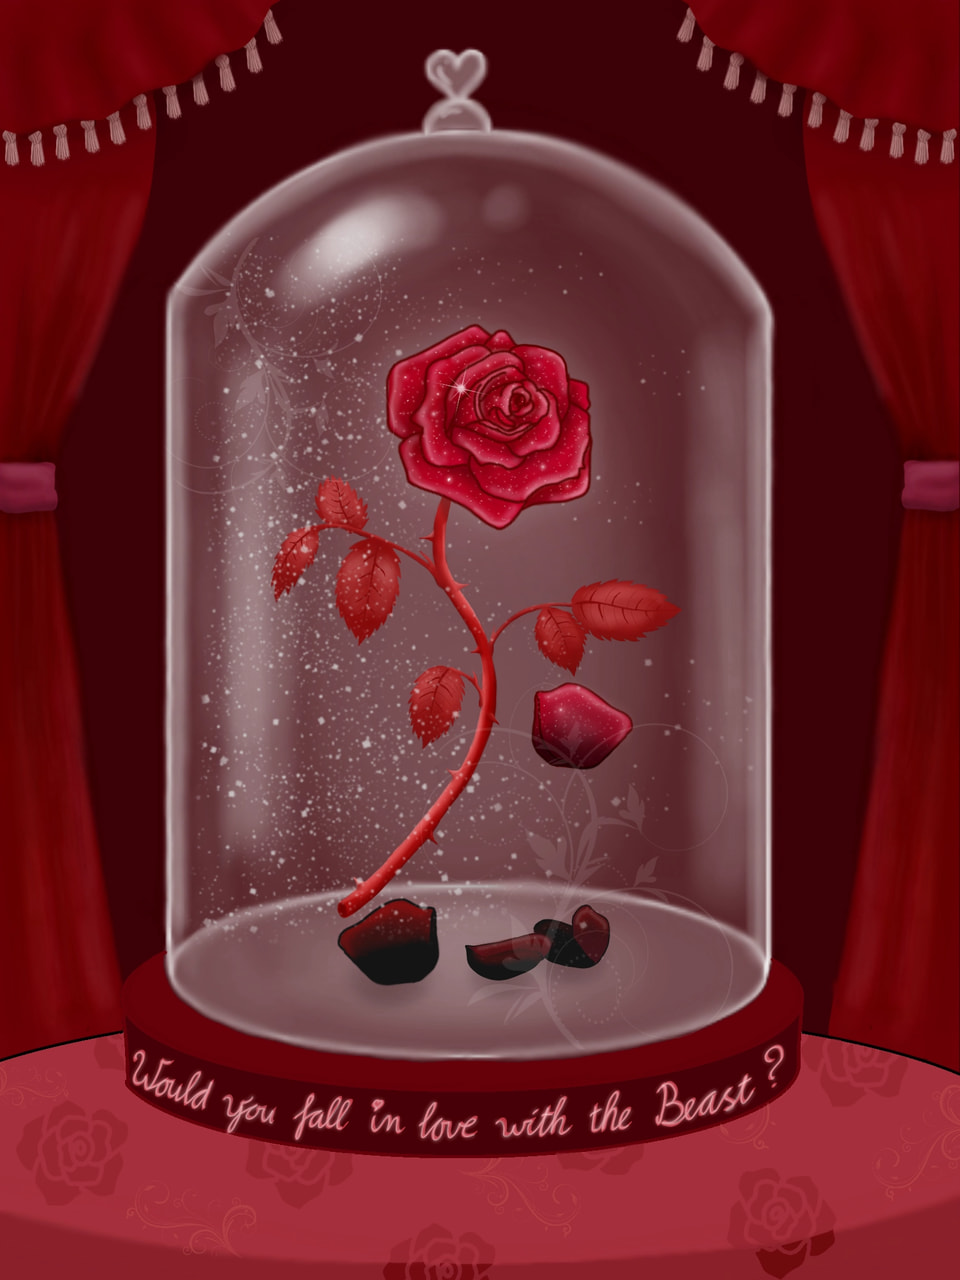 #Fridayswithsketch #colorweek #redchallenge AAAHHH, finally done! Dont think I need to explain the theme right xD i have never worked so hard on a rose before, but i love the end result. #BeautyandtheBeast